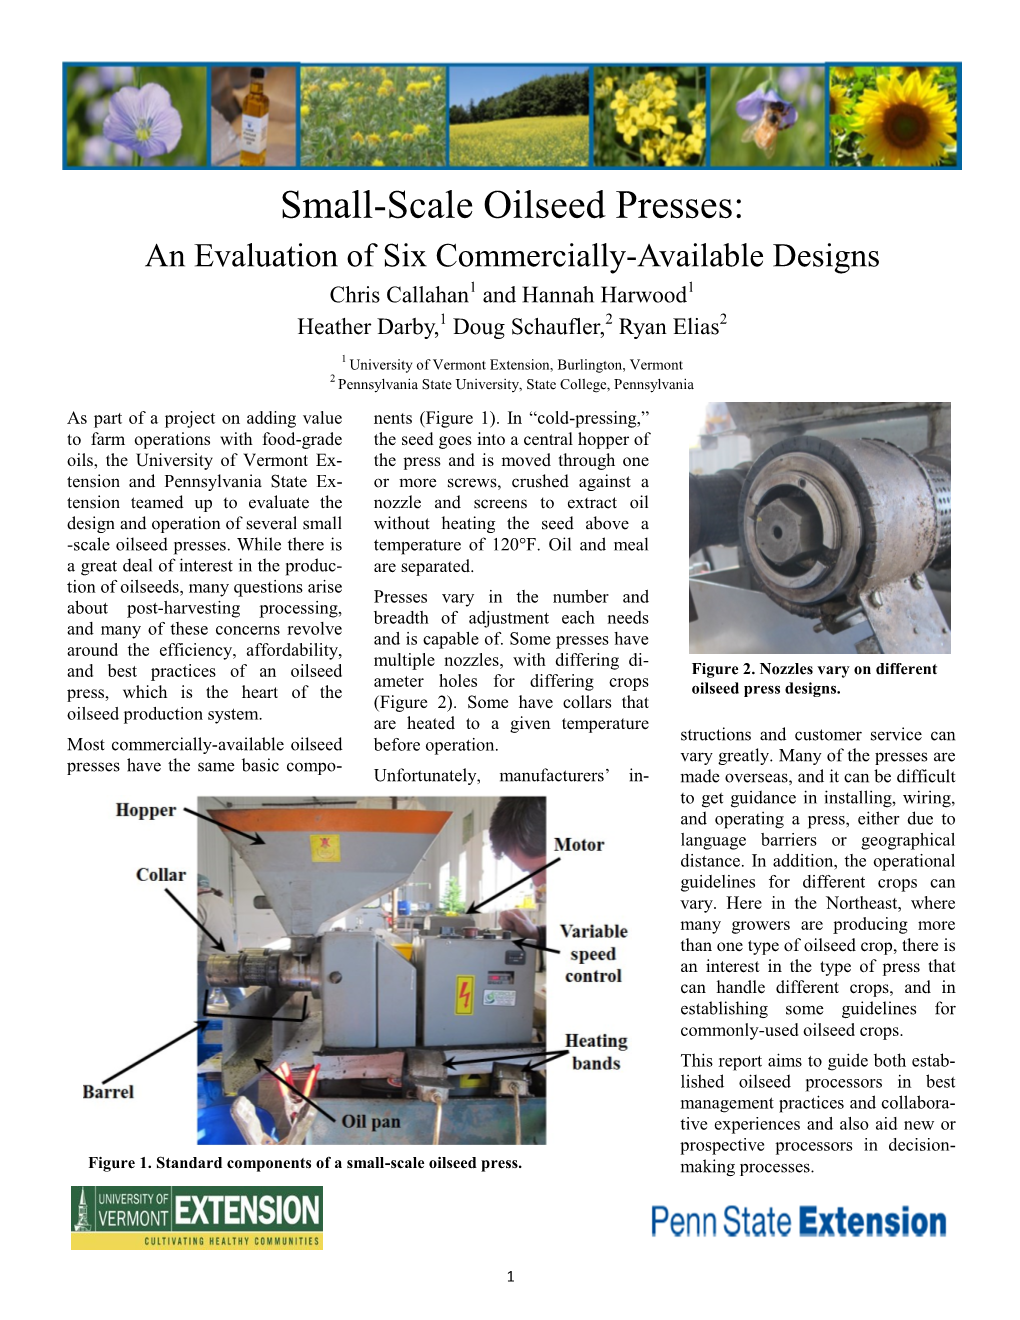 Small-Scale Oilseed Presses: an Evaluation of Six Commercially-Available Designs Chris Callahan1 and Hannah Harwood1 Heather Darby,1 Doug Schaufler,2 Ryan Elias2